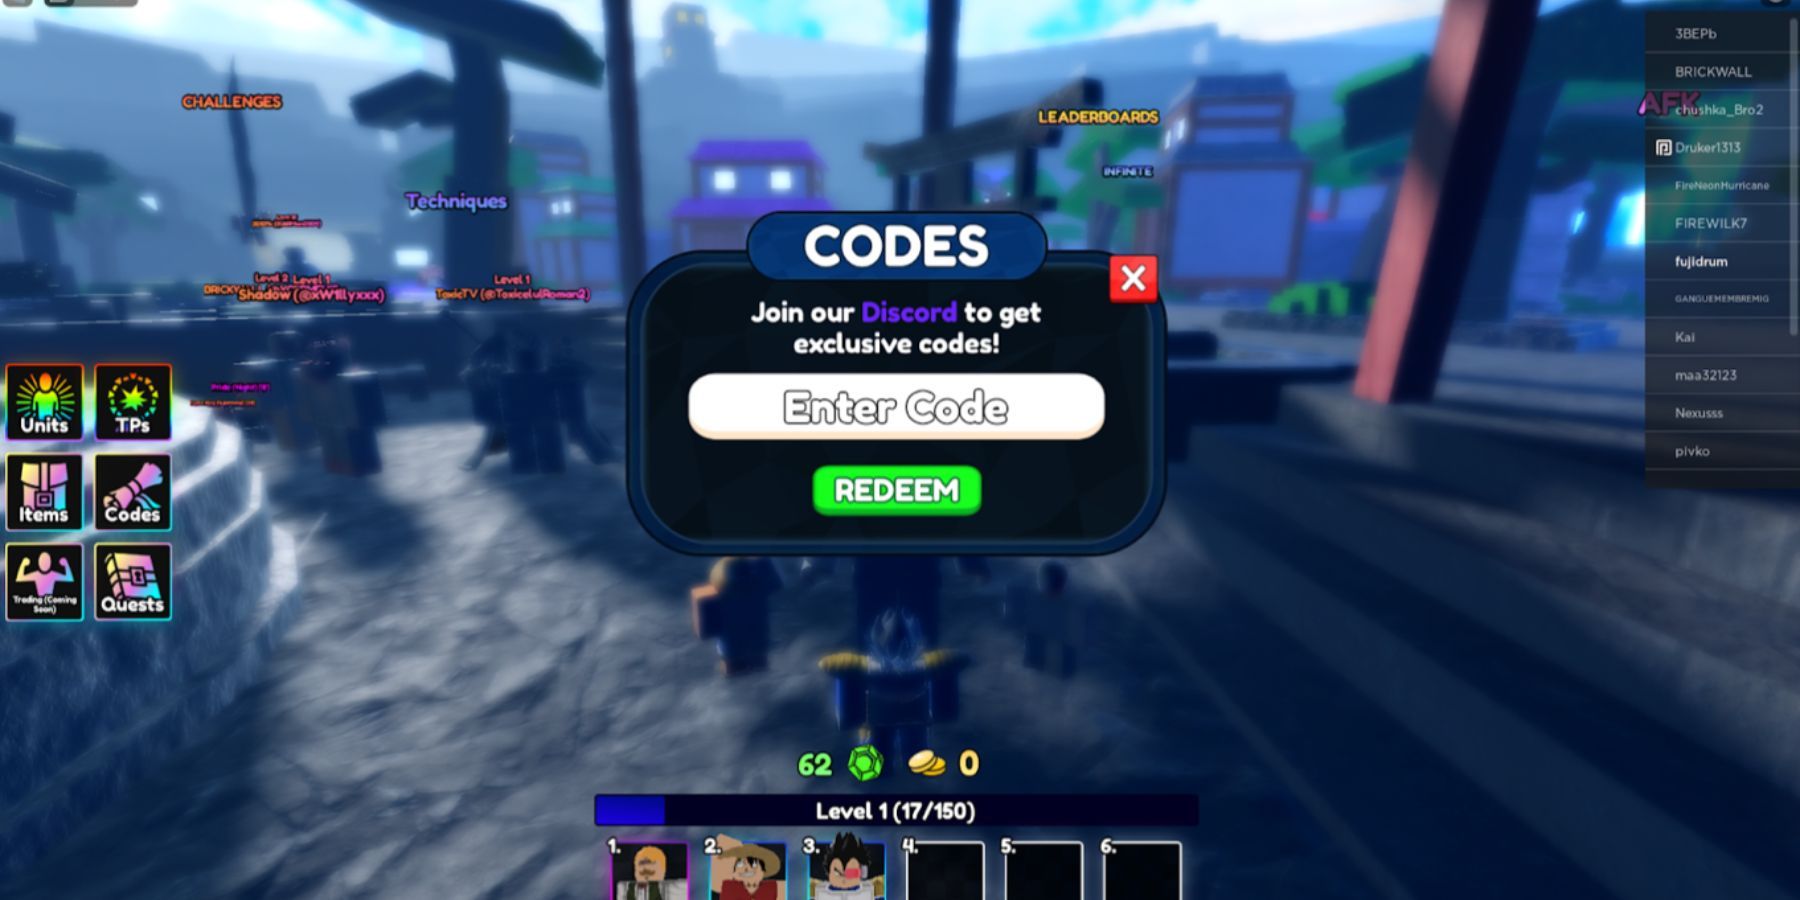 Anime Last Stand: the codes tab